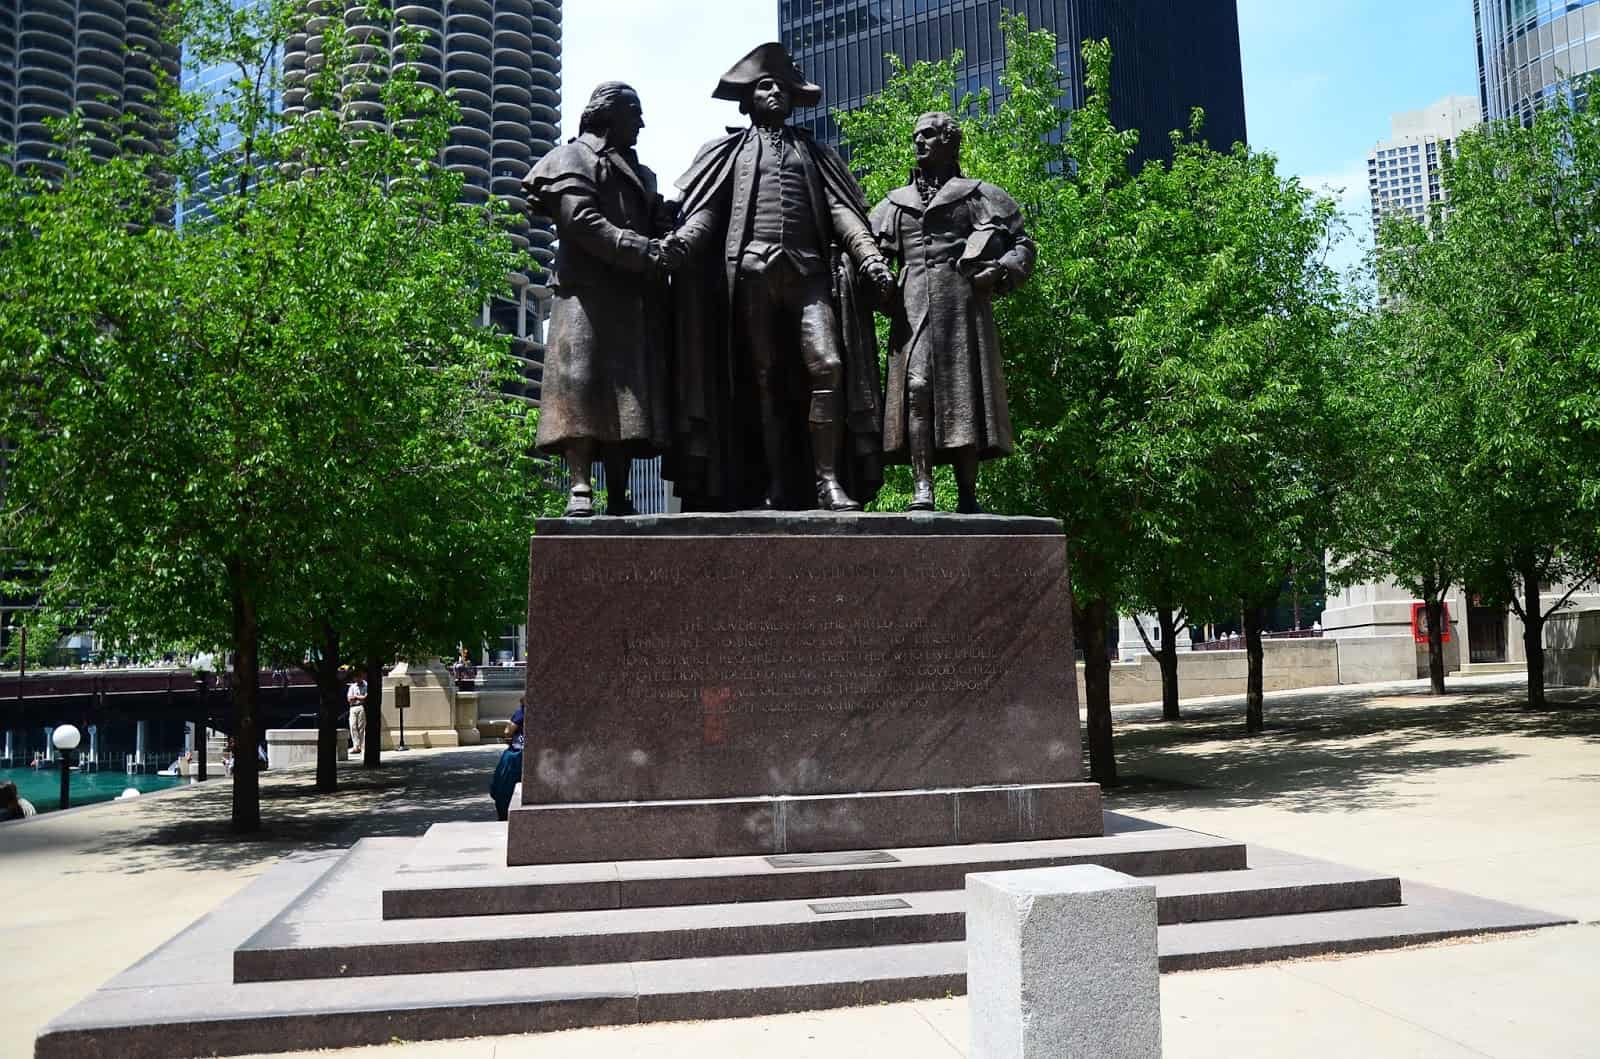 Heald Square Monument in Chicago